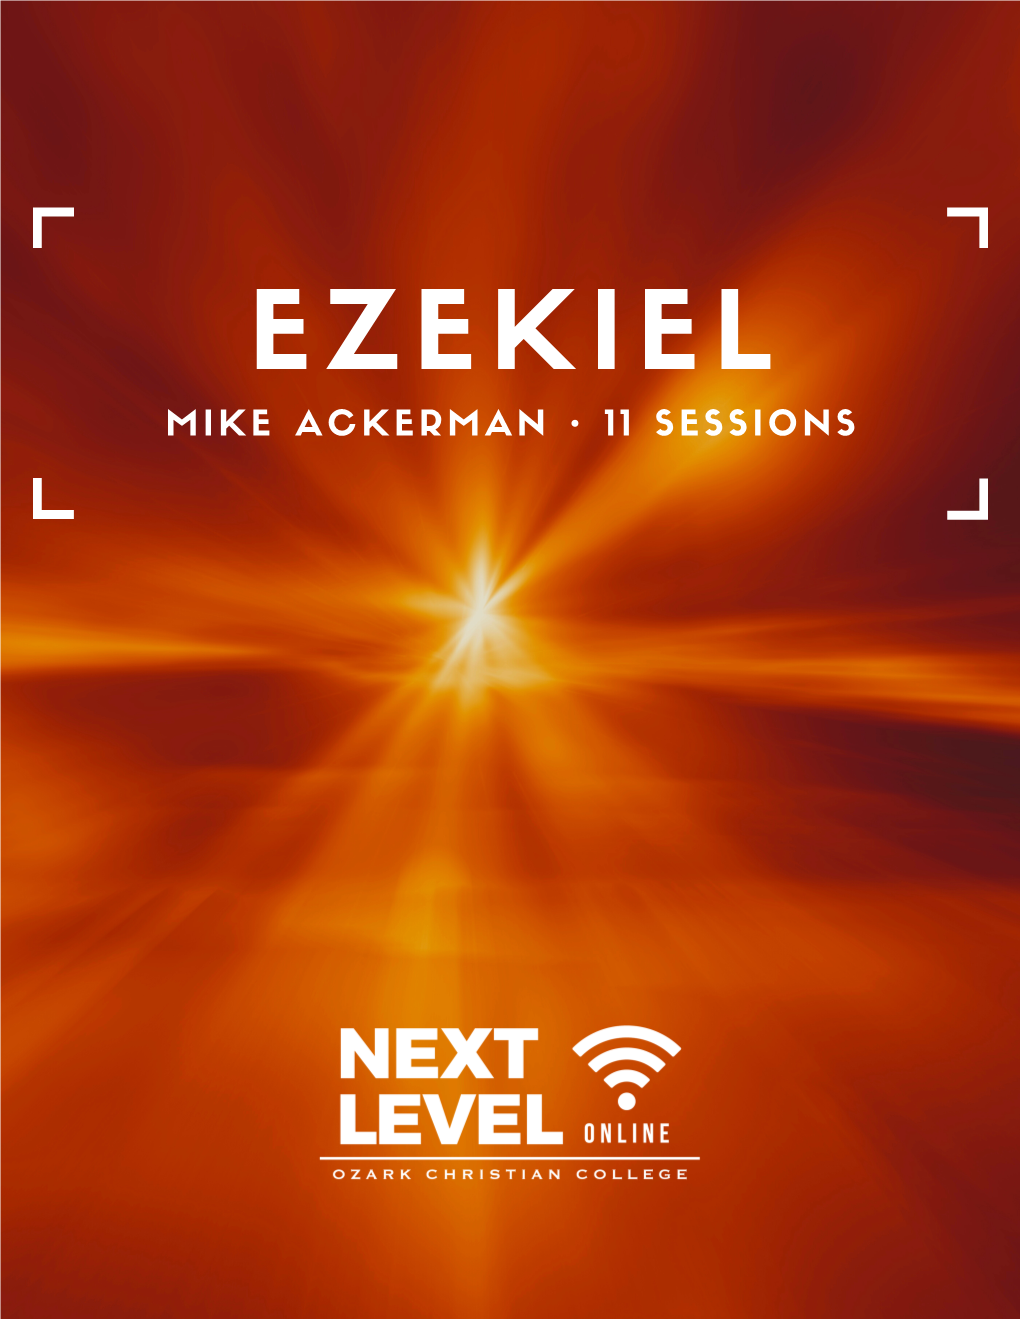 Ezekiel Session 1 Introduction and Overview